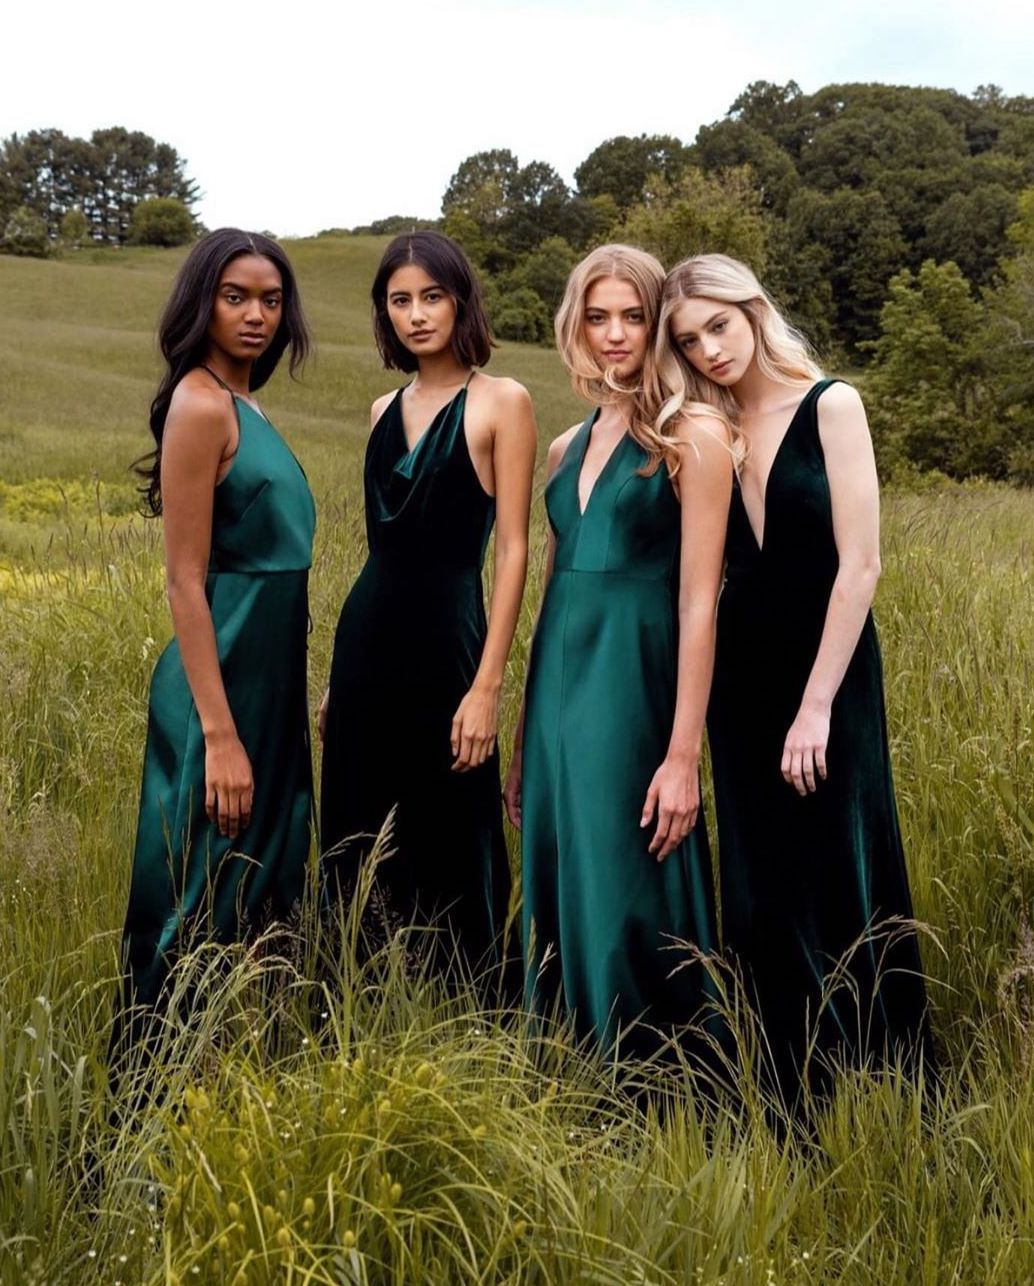 Four models wear dresses of various shades of green.